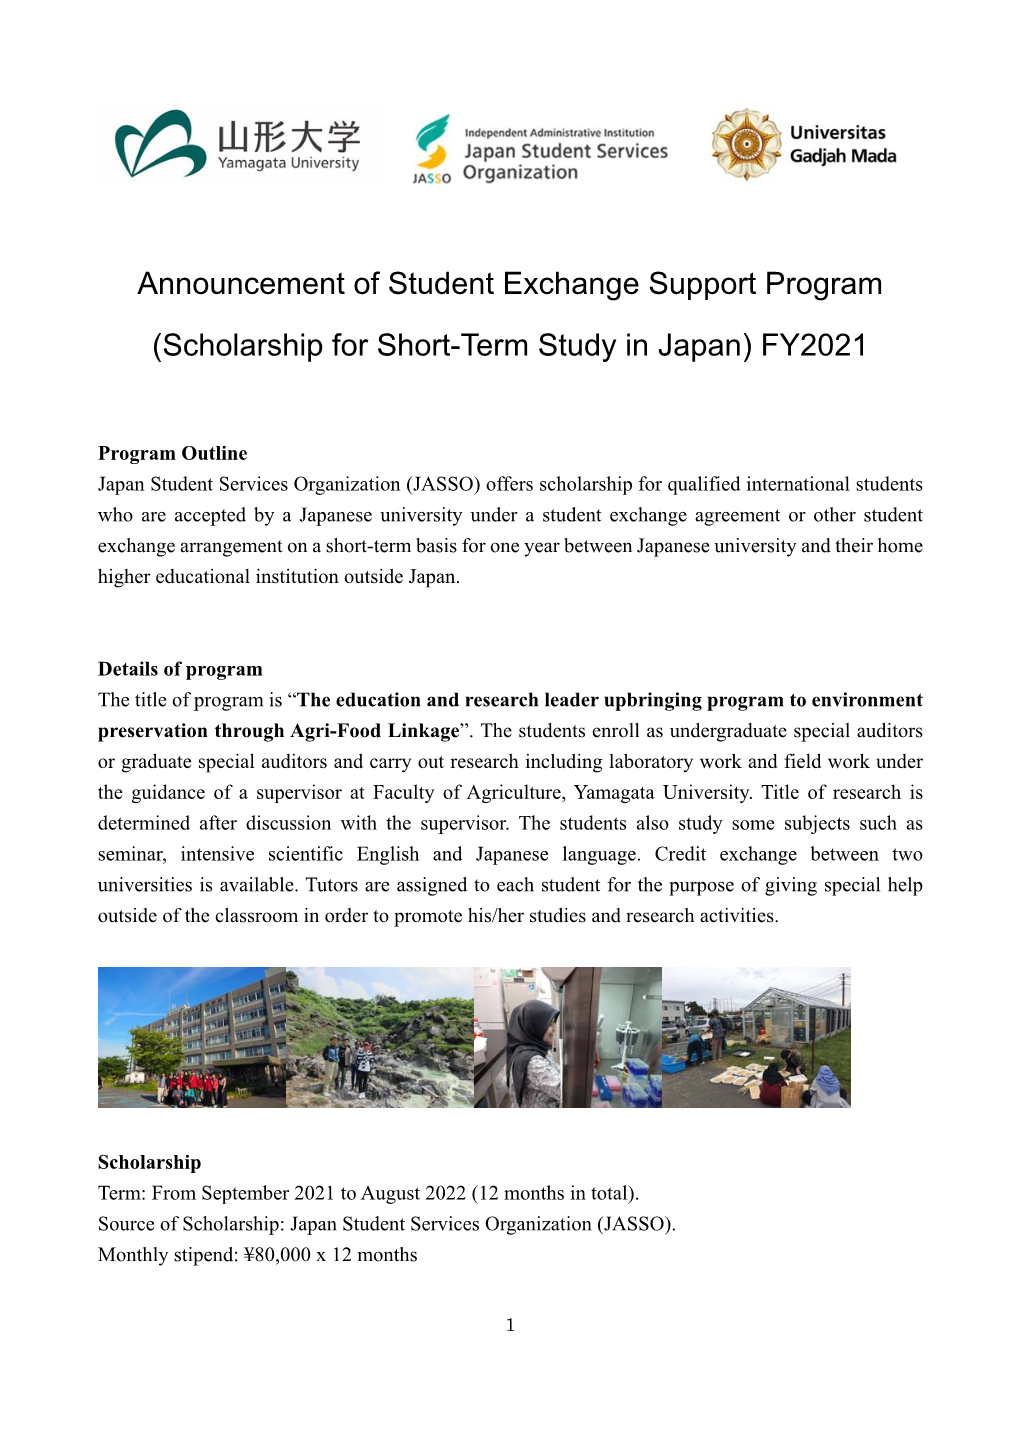 Announcement of Student Exchange Support Program (Scholarship for Short-Term Study in Japan) FY2021